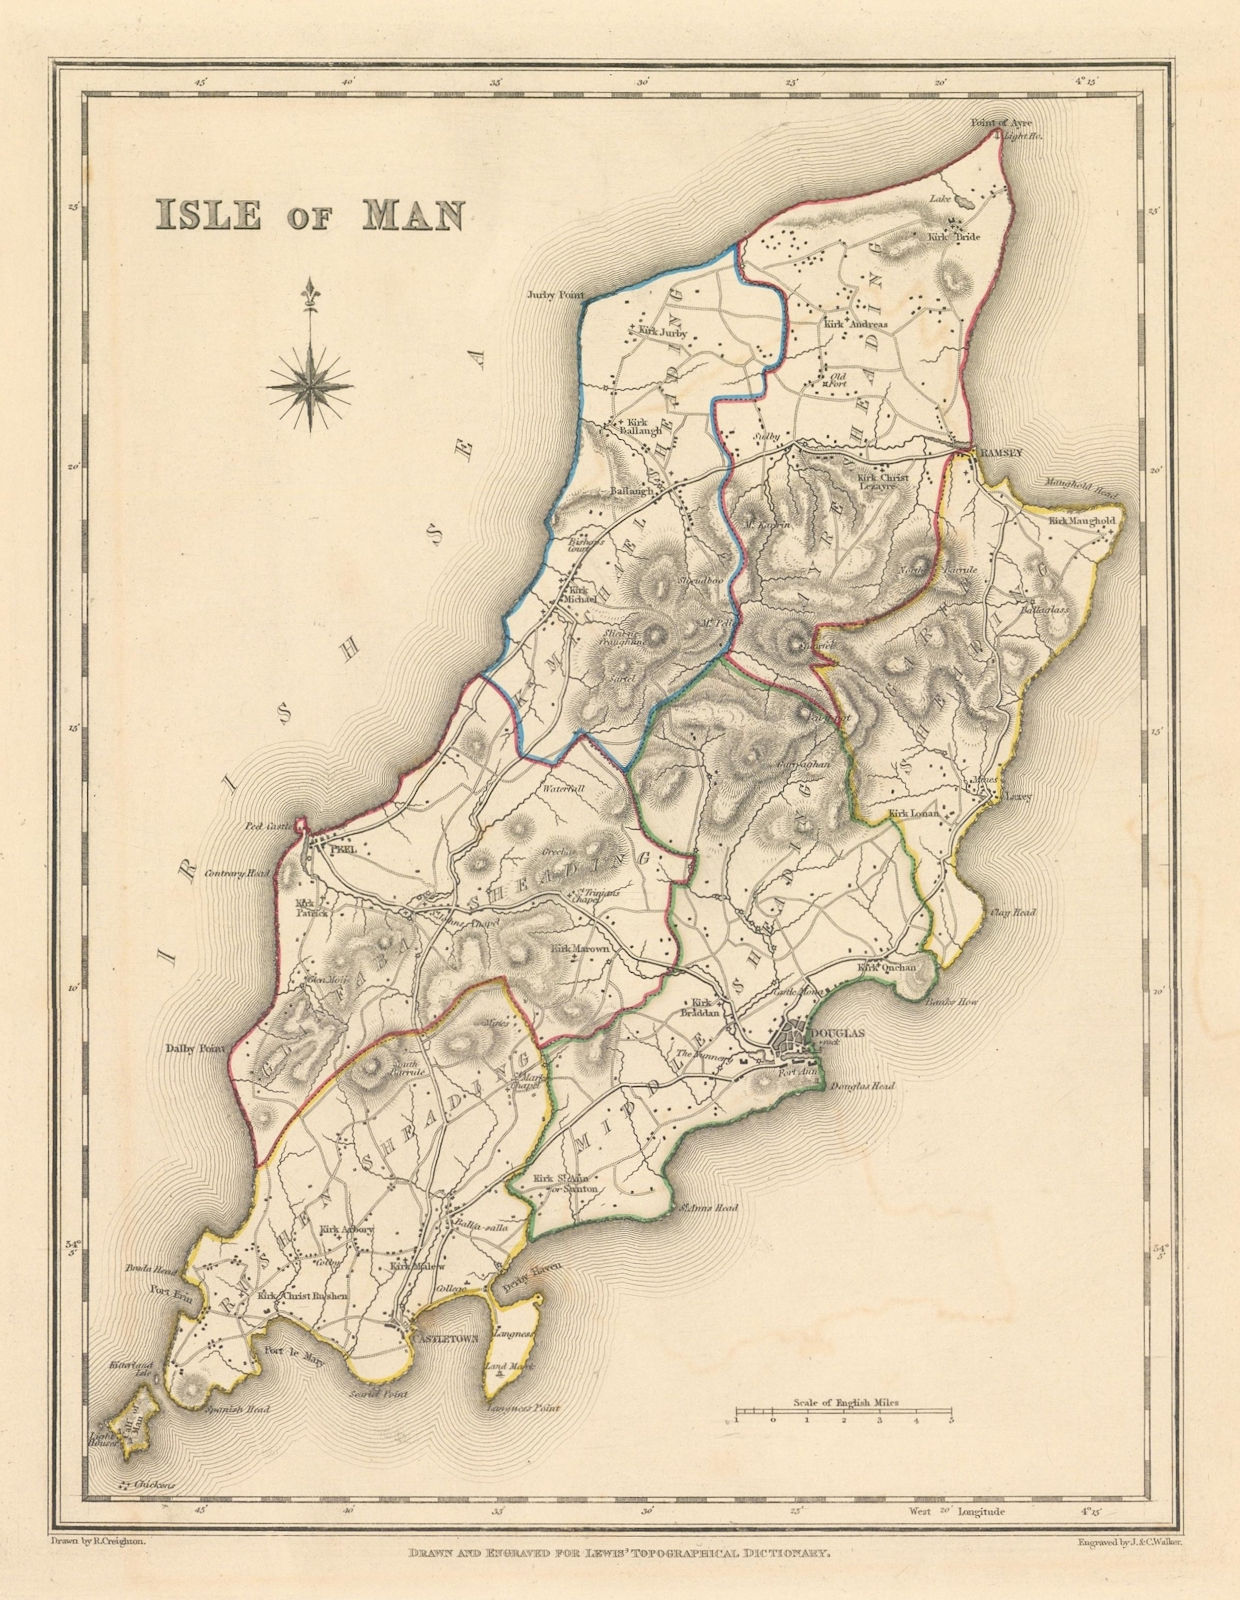 Associate Product Antique map of the ISLE OF MAN by Creighton & Walker for Lewis c1840 old